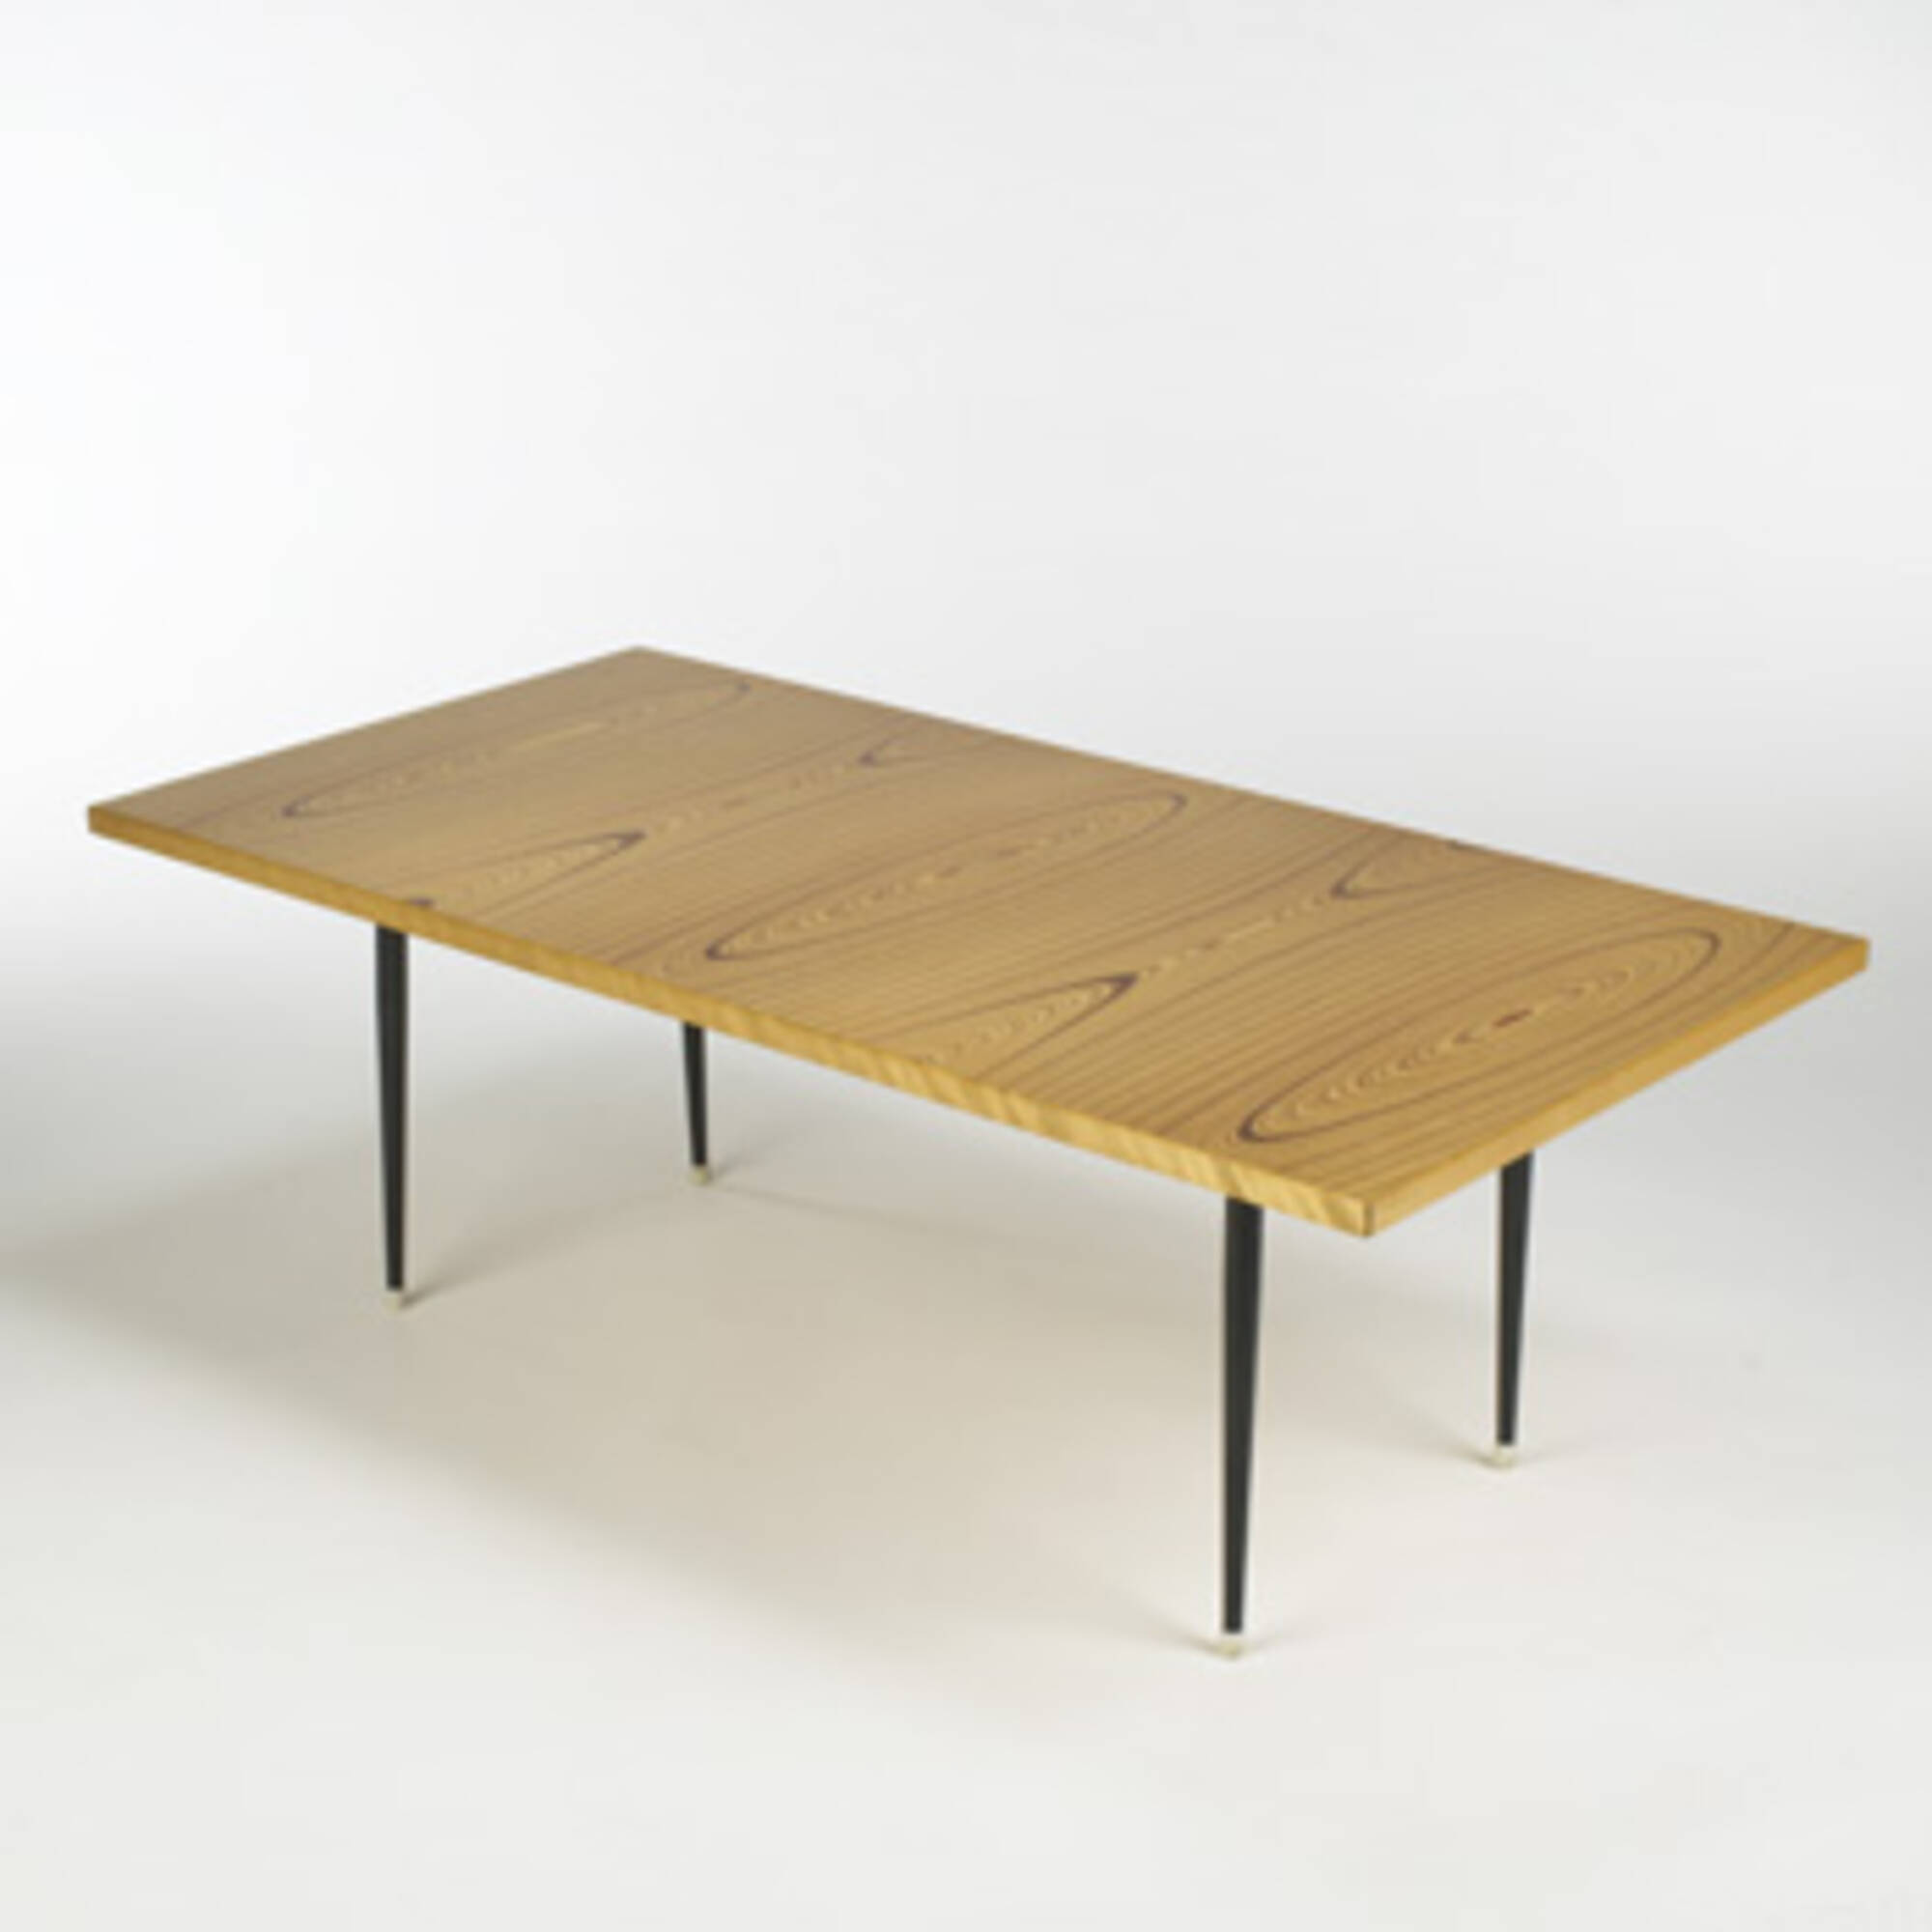 446: TAPIO WIRKKALA, coffee table < Modern Design, 20 March 2005 < Auctions  | Wright: Auctions of Art and Design